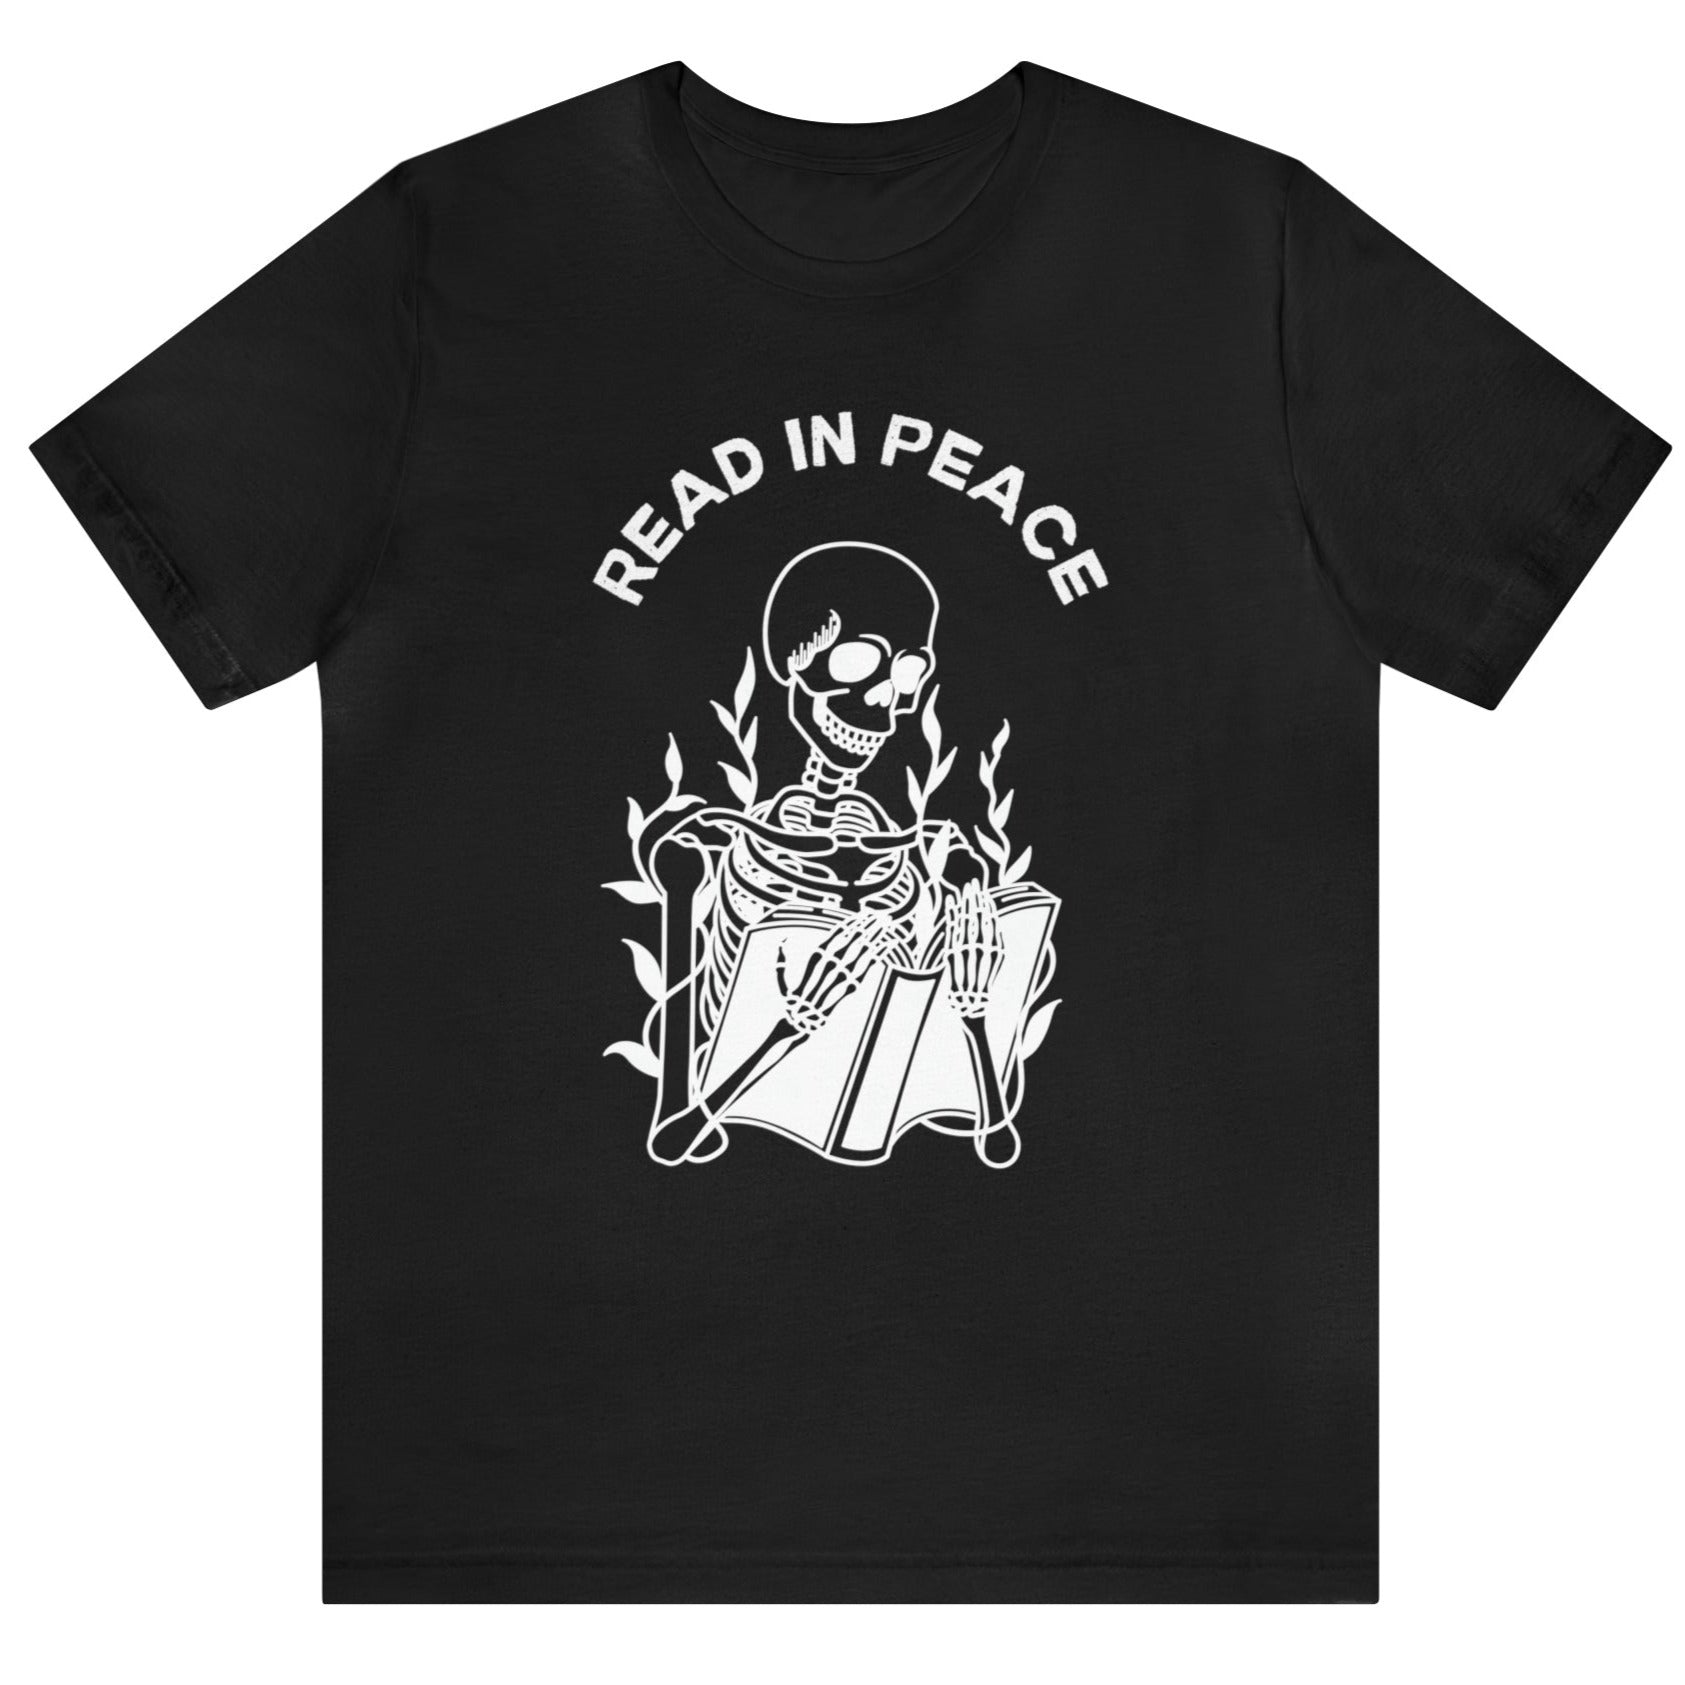 Read In Peace Top by The Dark Side of Fashion